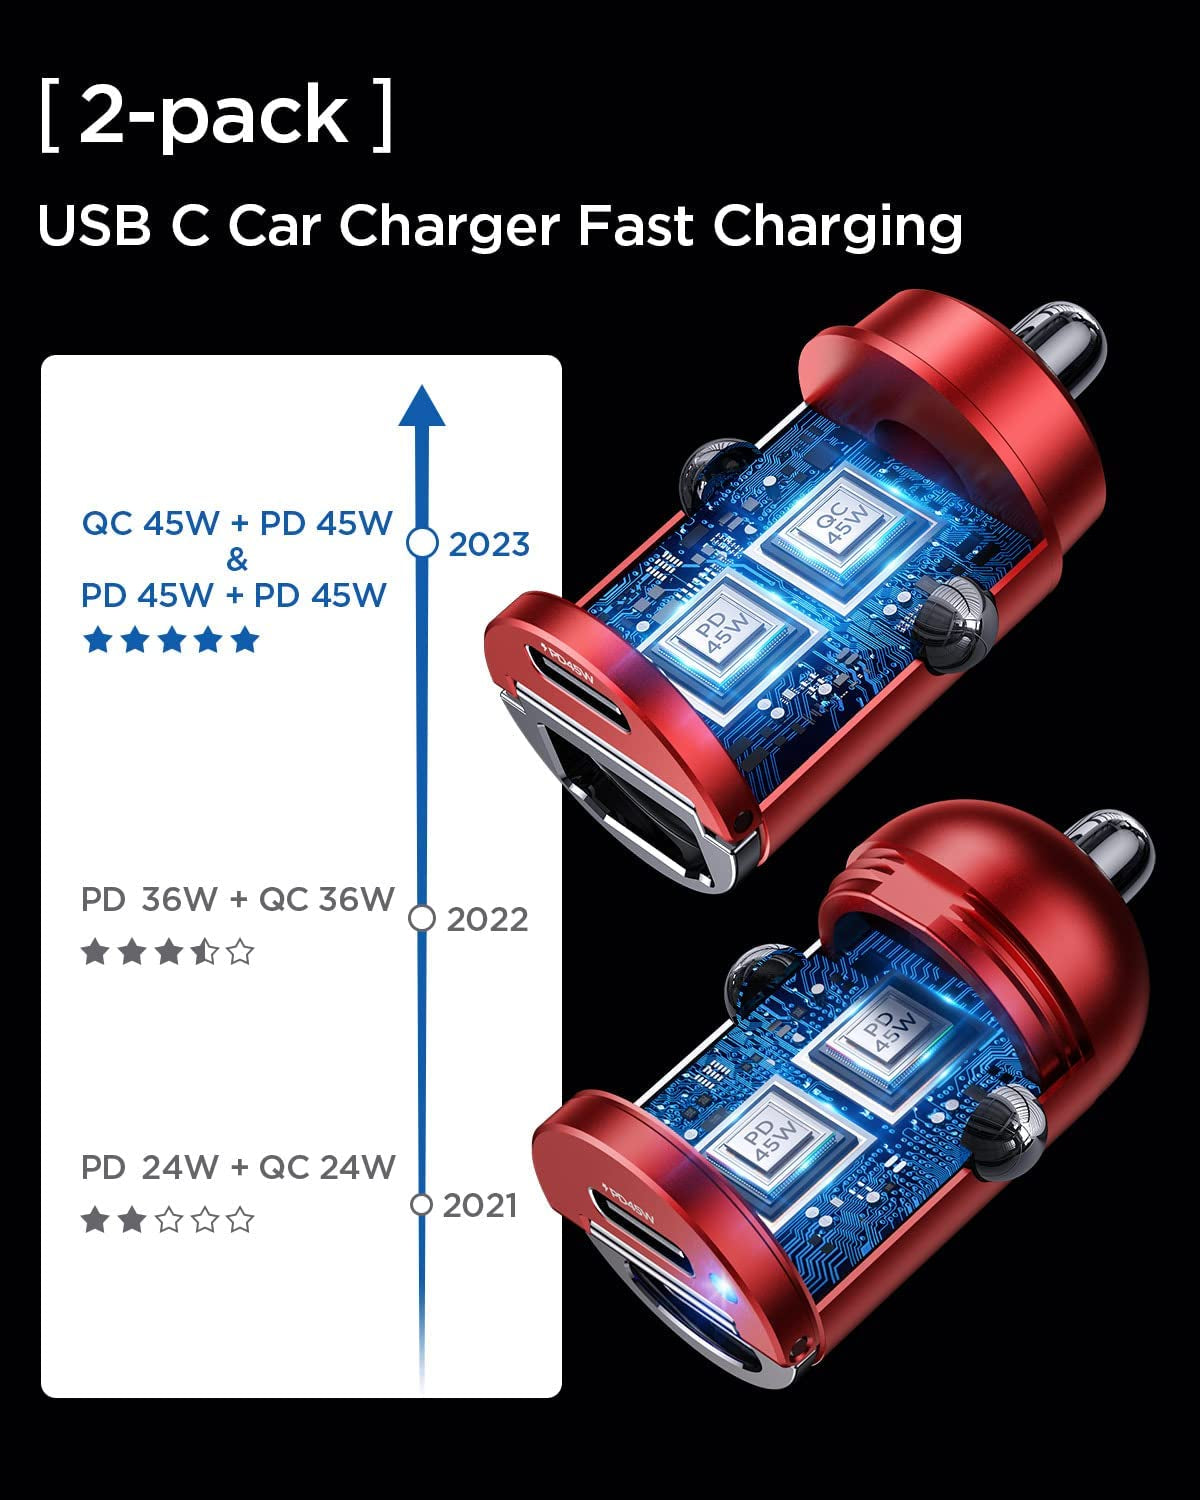 (2-Pack) Dual PD 90W USB C Car Charger, Fast Charging Adapter with Pd+Qc, Super Mini Metal Design, Compatible with iPhone 14 13 Pro Max, iPad, Samsung - Red 